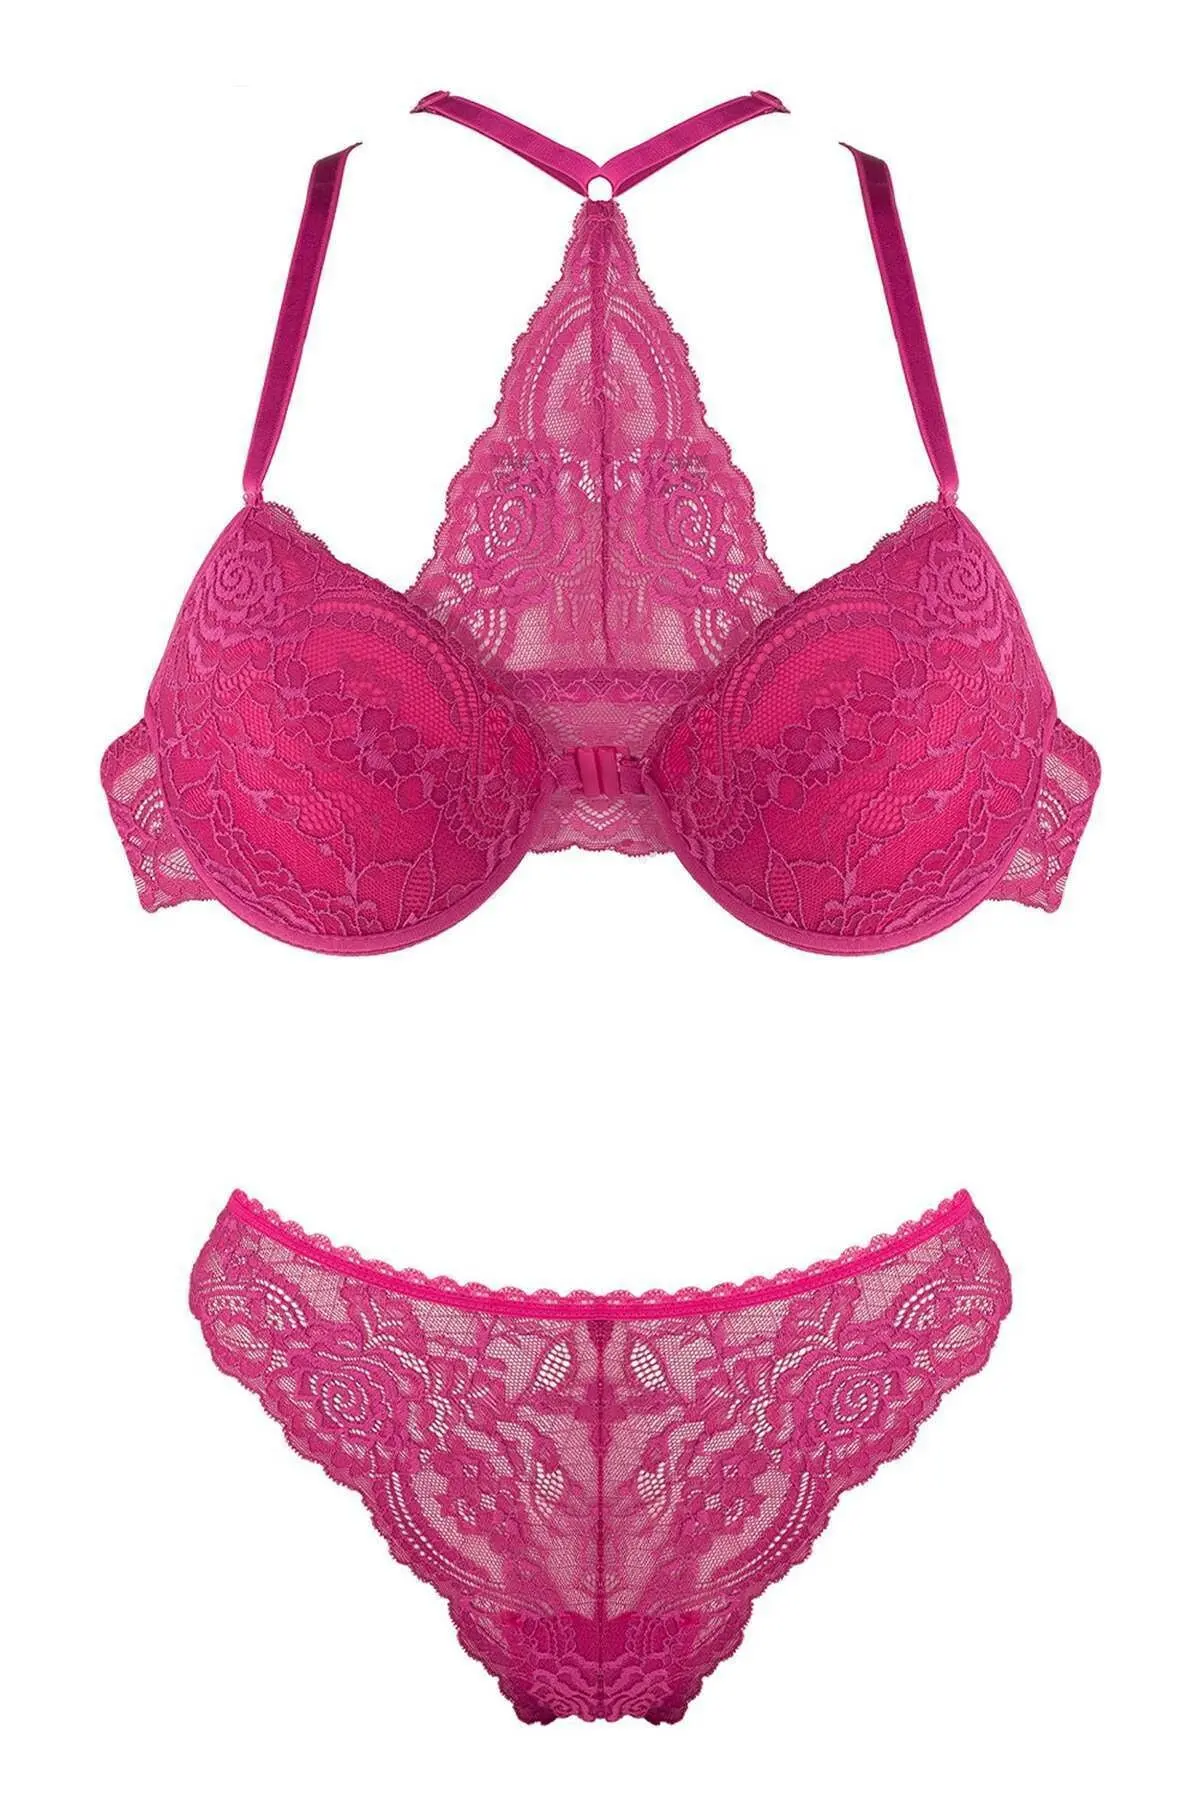 LOOK FOR YOUR WONDERFUL NIGHTS IN GORGEOUS COLOR Women's Women's Pink Front Clip-on Supported Bra Set FREE SHIPPING